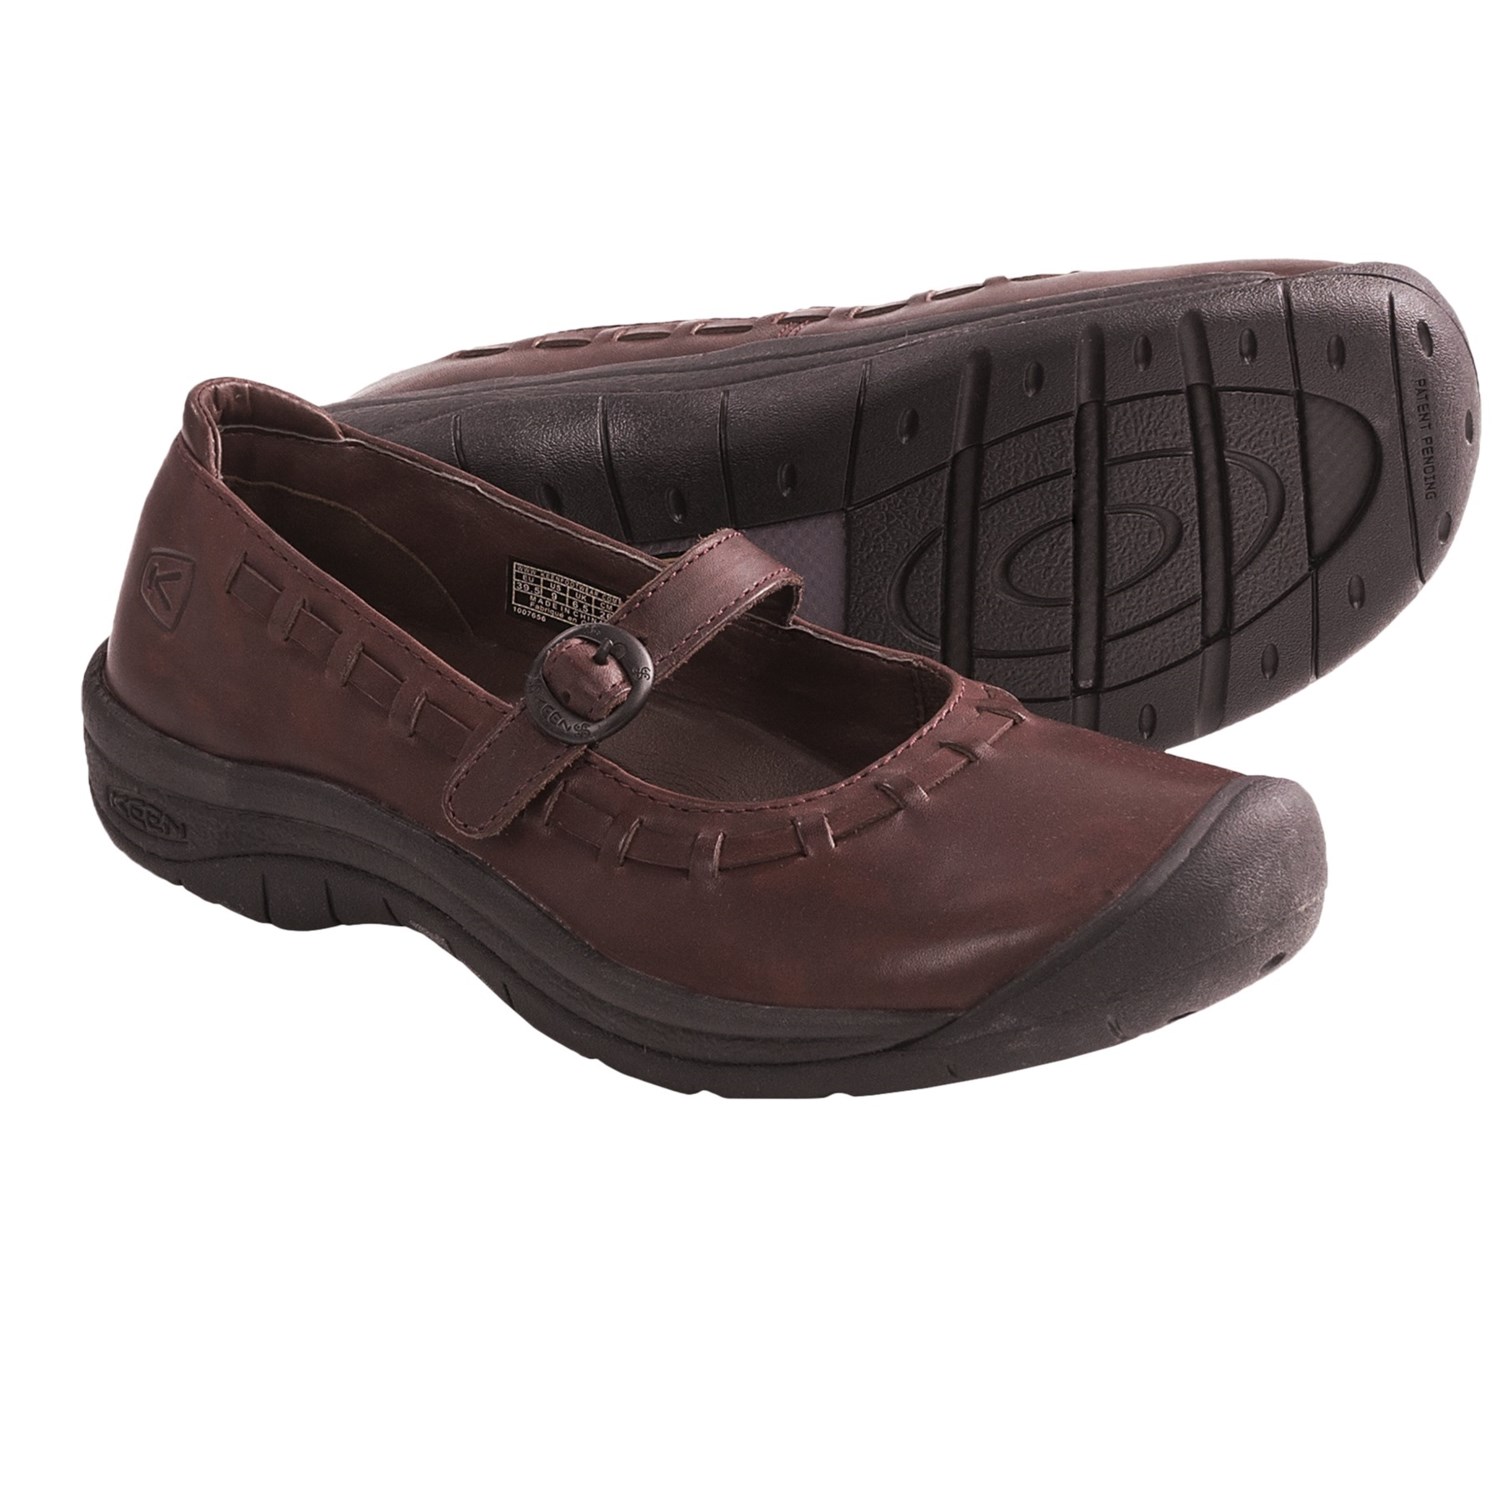 Keen Winslow Mary Jane Shoes - Leather (For Women) - Save 25%